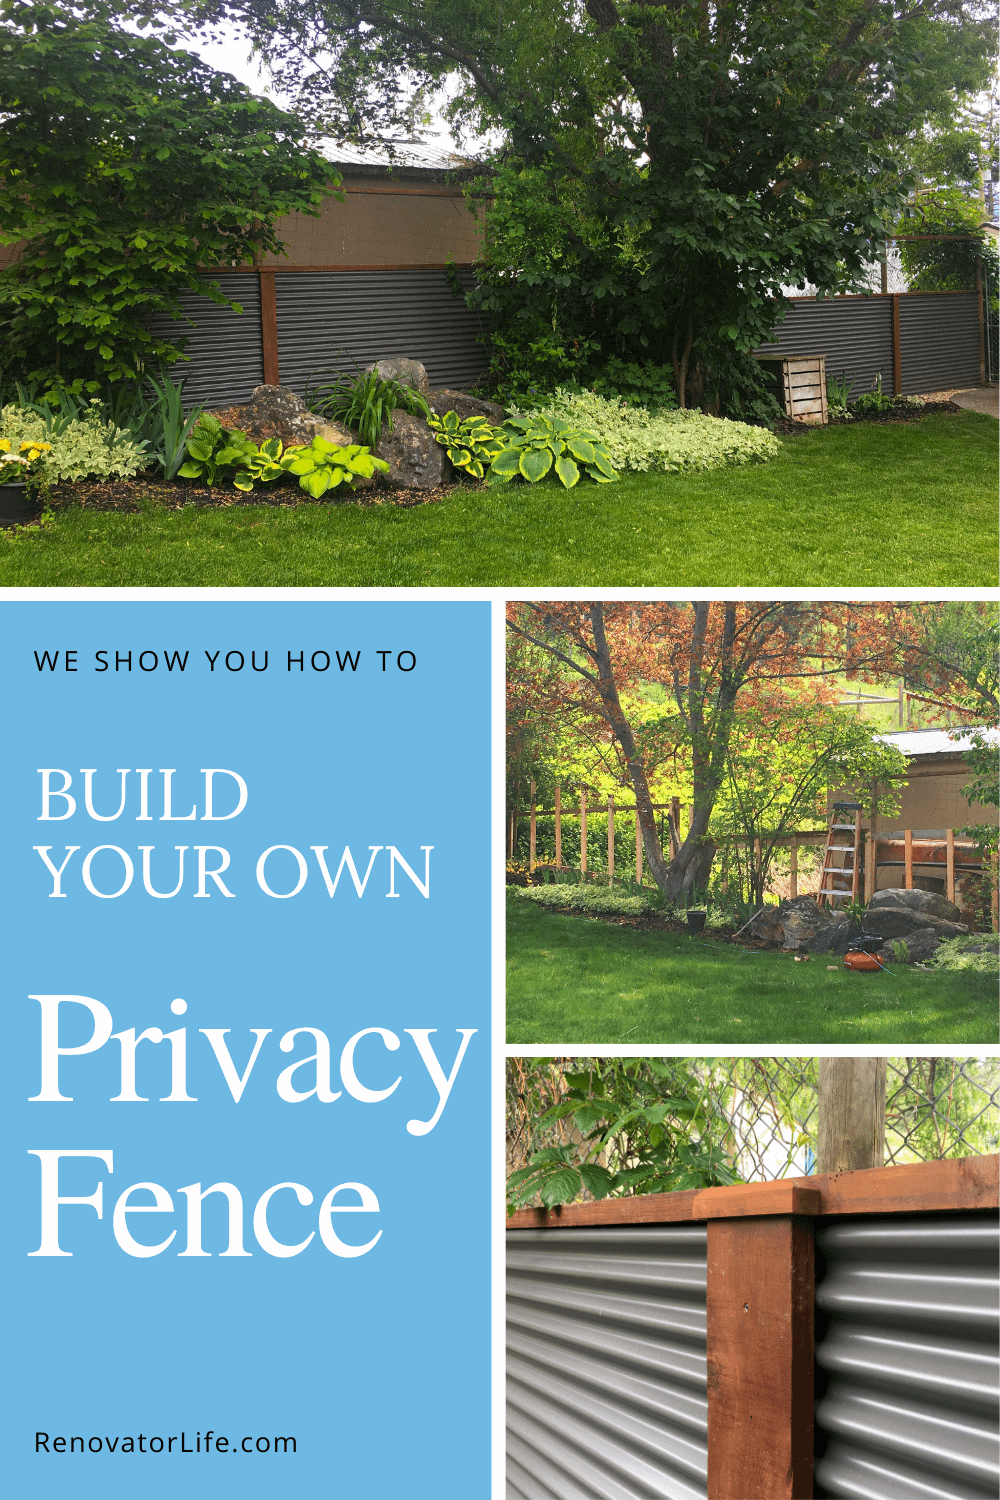 Build Your Own Privacy Fence